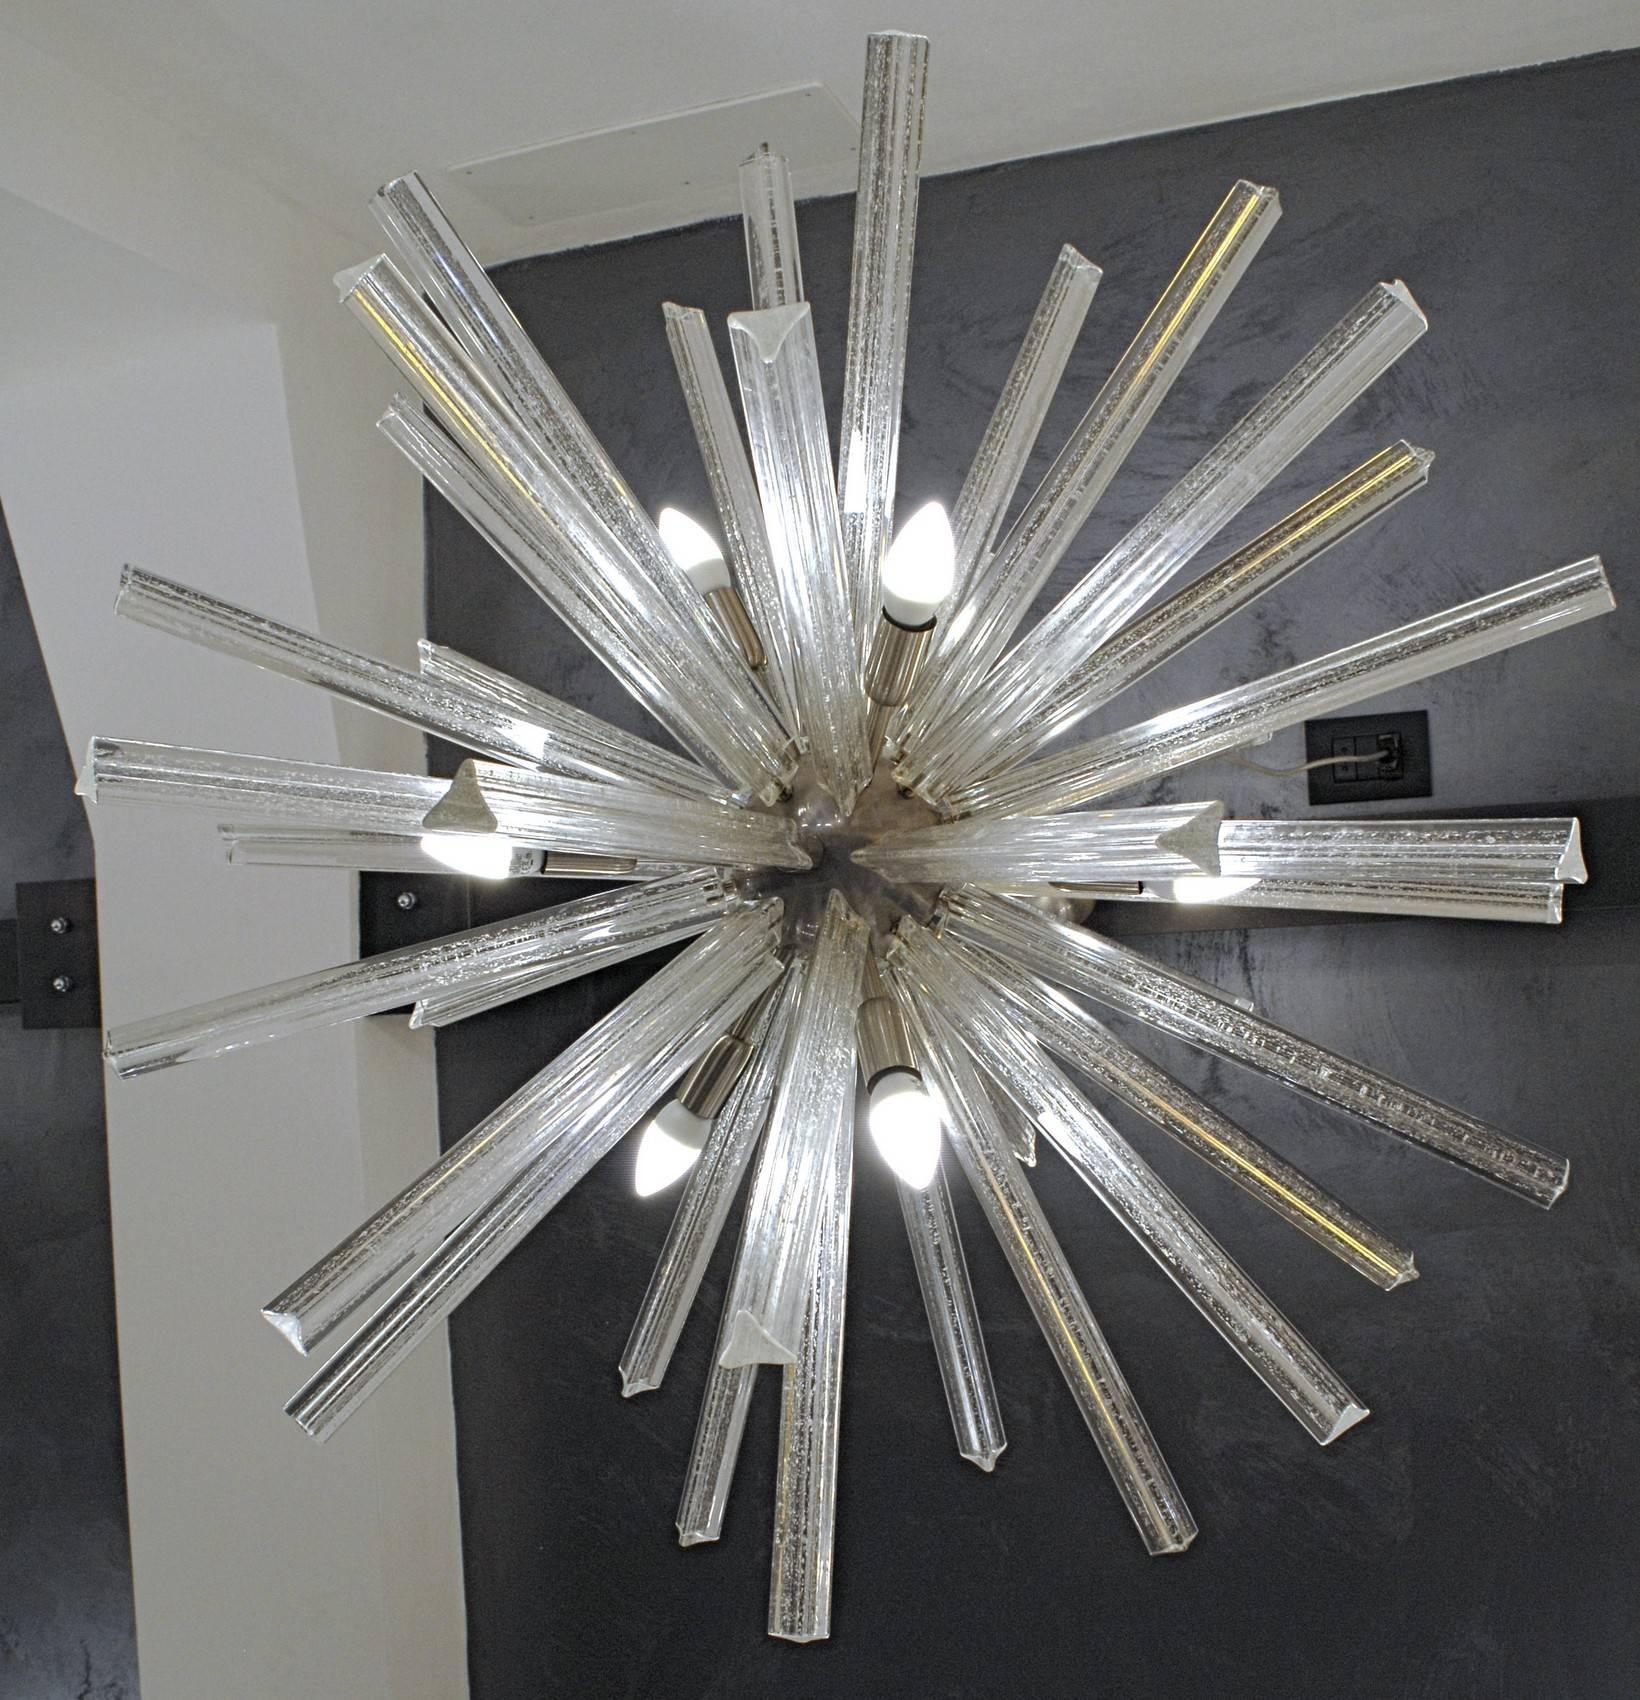 Compact and graceful midcentury style Sputnik chandelier. Murano glass hand-pulled triedri rods that are rolled over silver leaf. When pulling the shaped glass the silver leaf breaks in speckling that are making a beautiful play with light.

Made